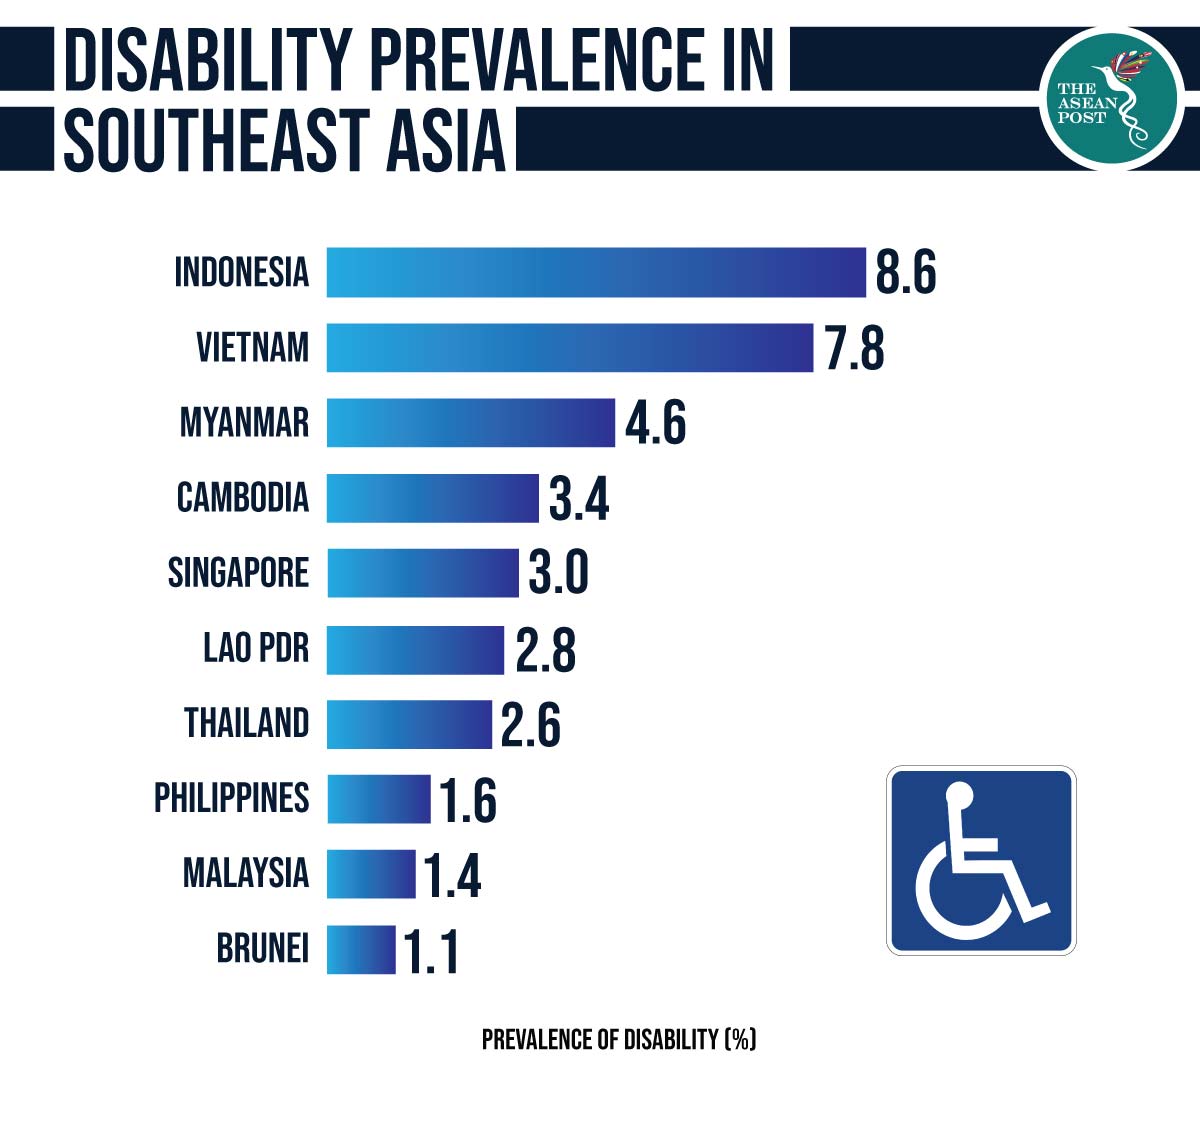 Disability prevalence in Southeast Asia